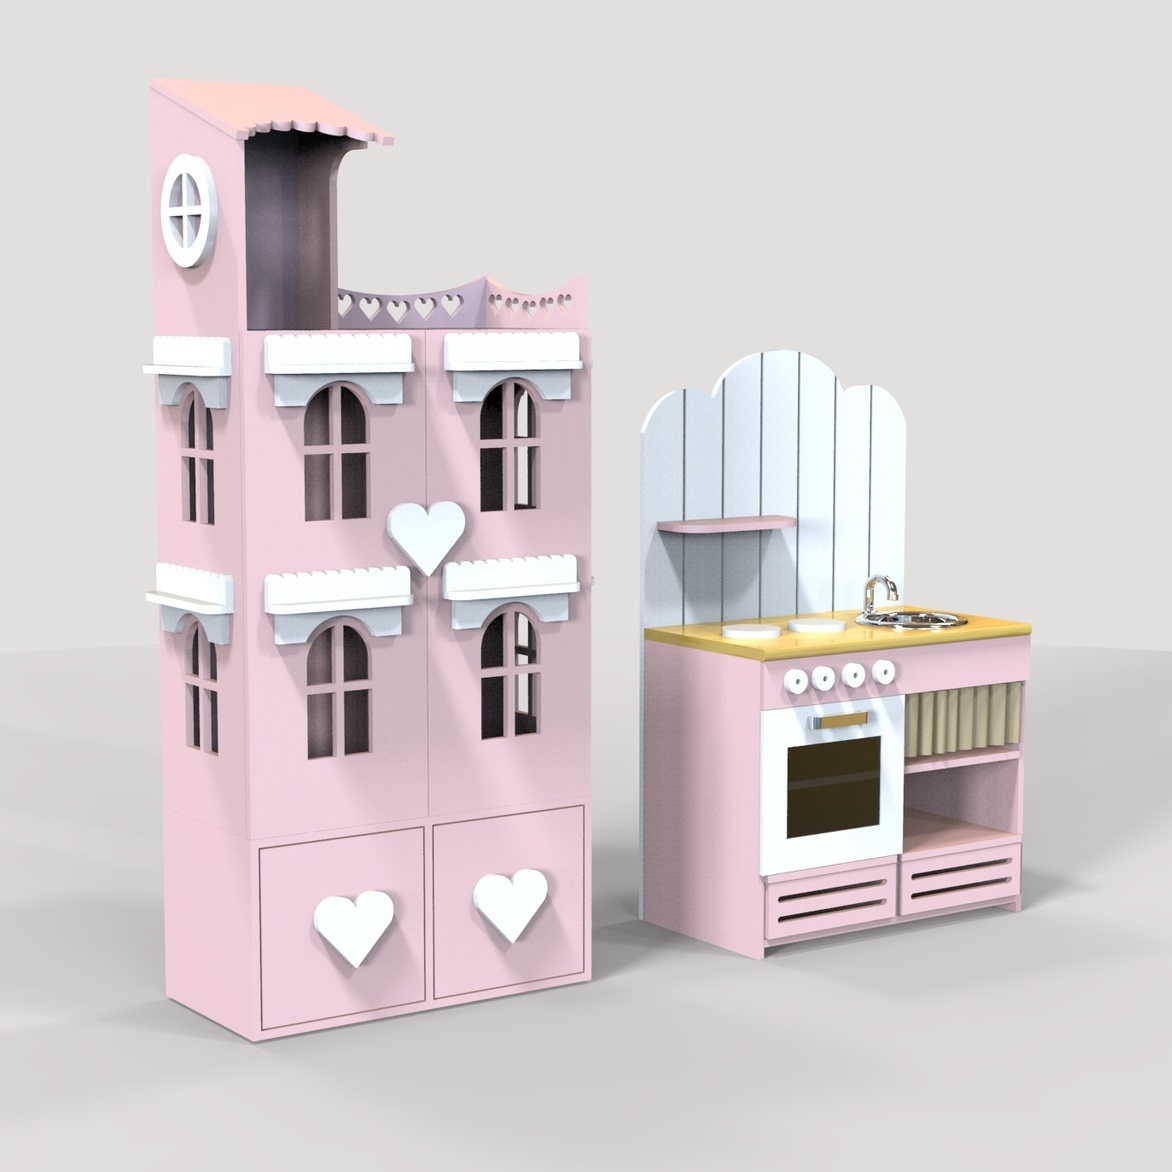 Laser Cut Dollhouse And Mini Oven Toy DXF File